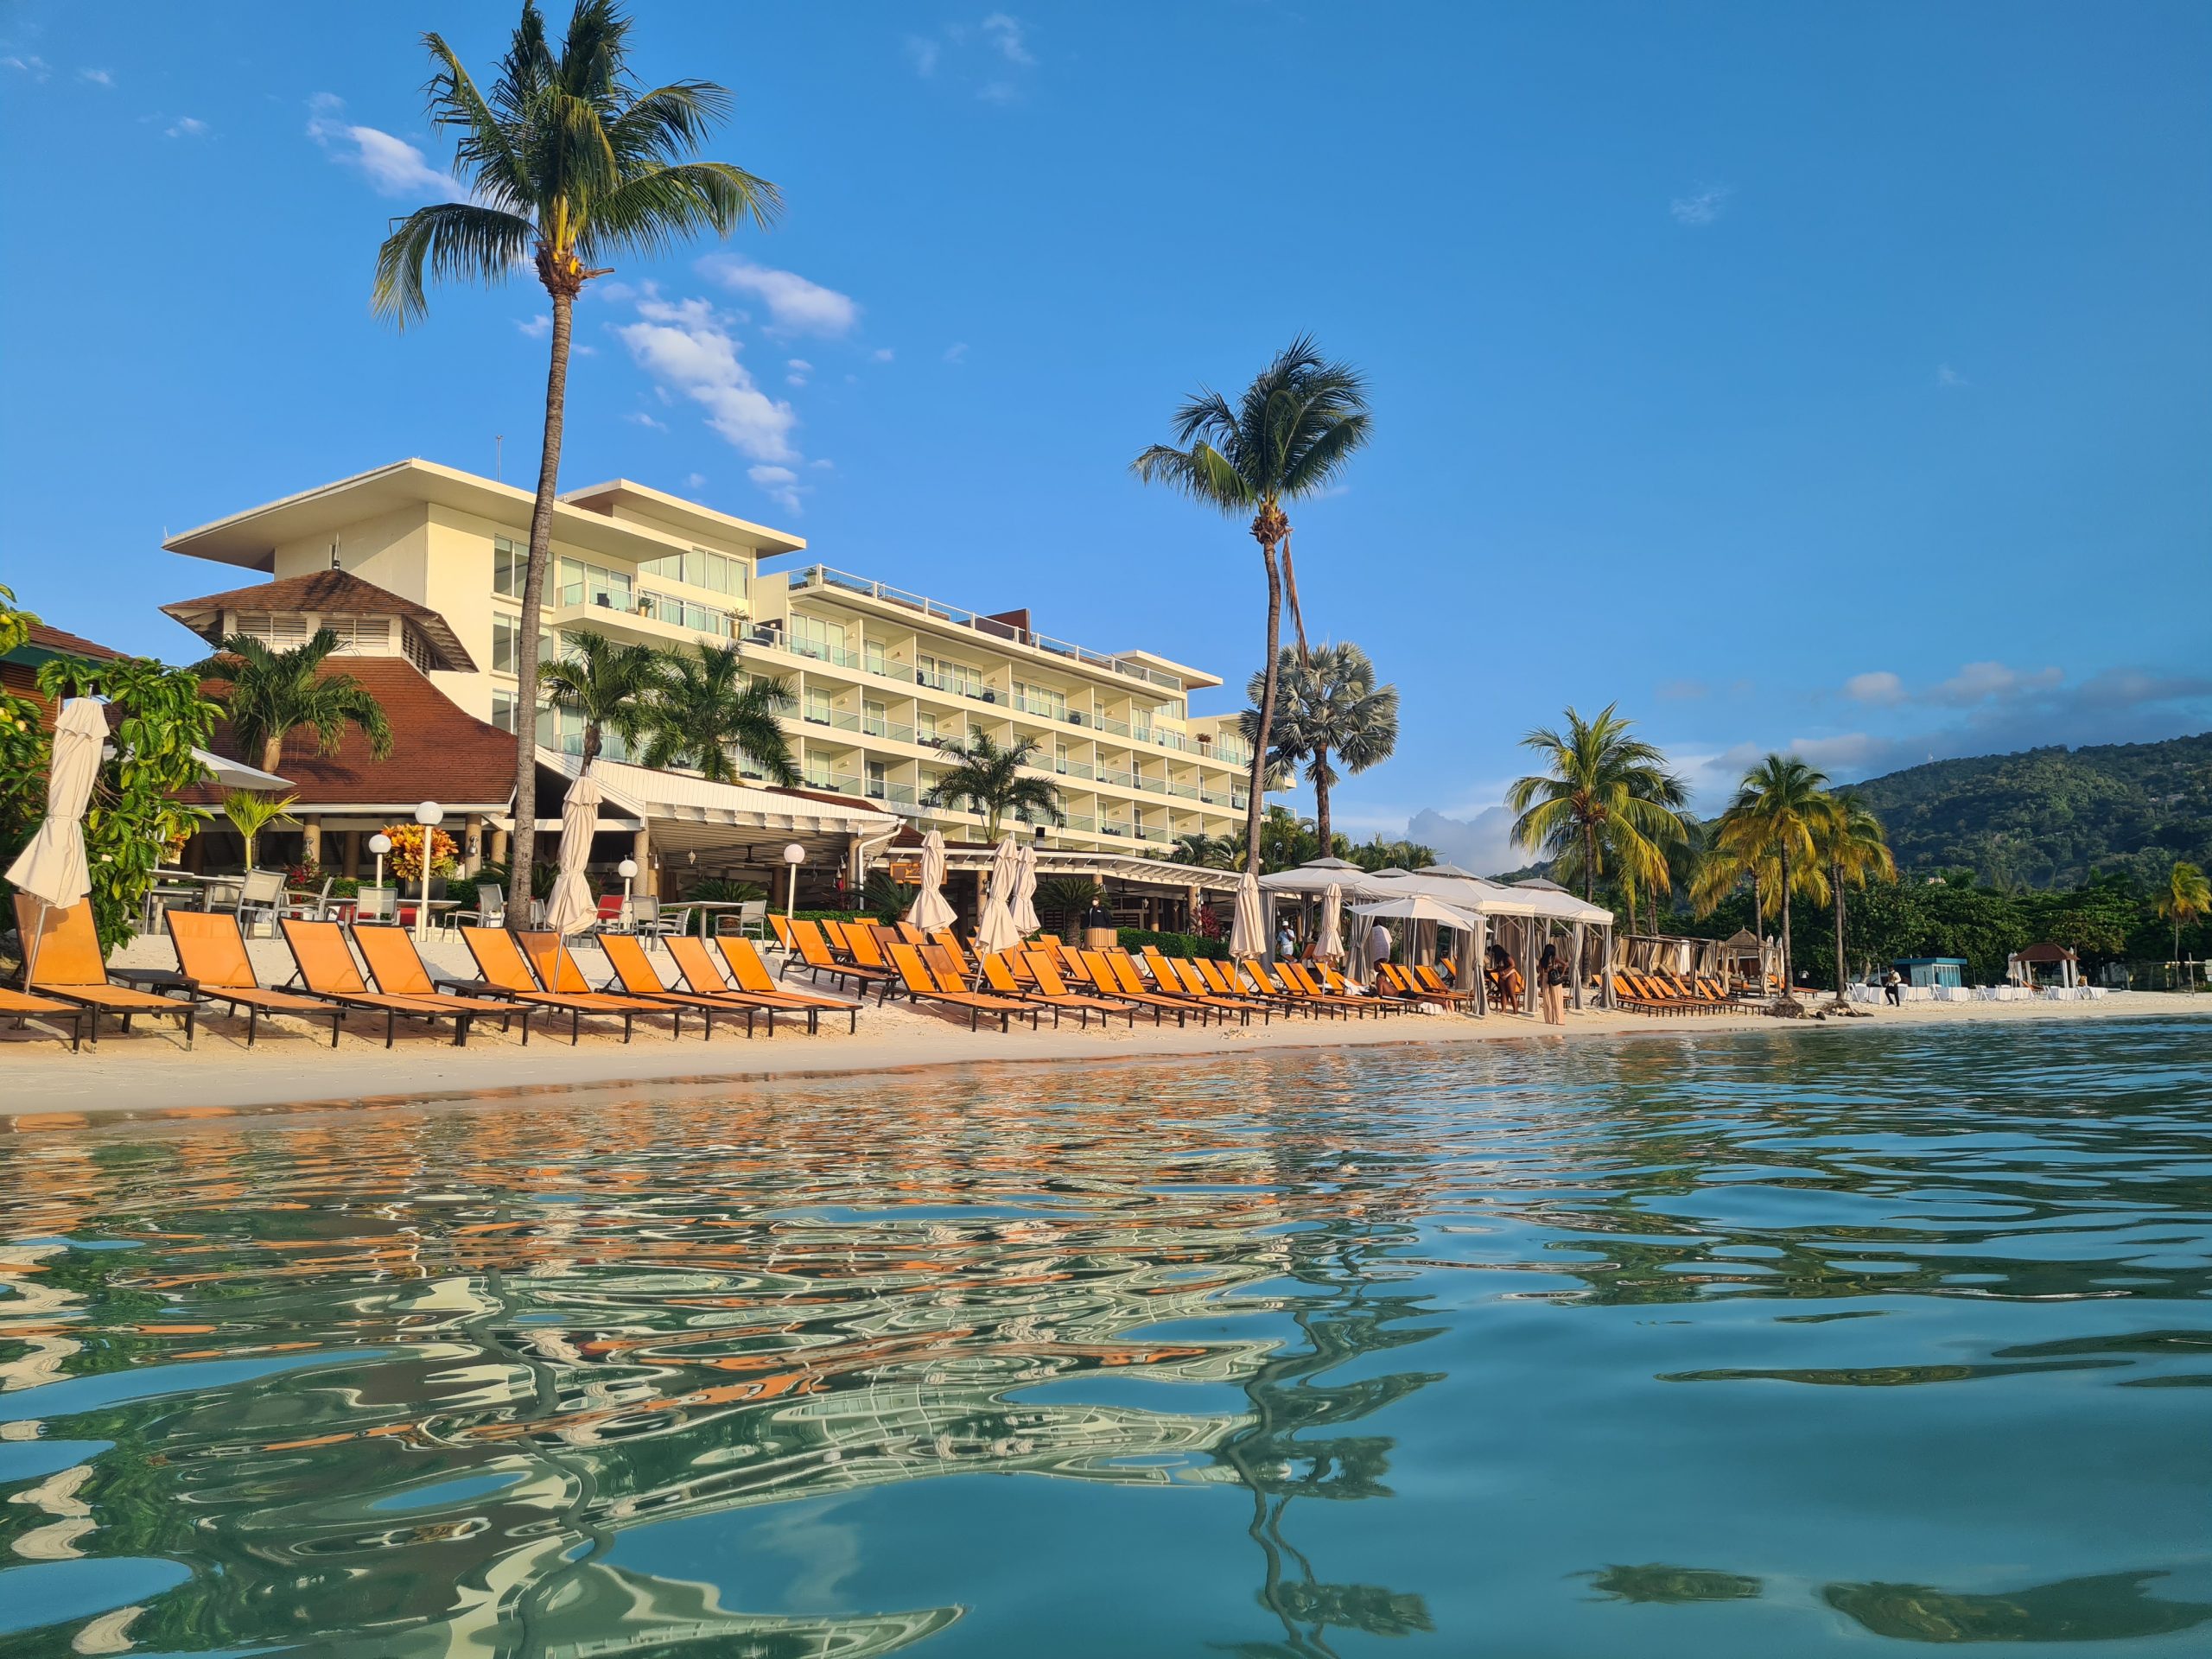 10 Reasons Why Moon Palace Jamaica All Inclusive Resort is the Best